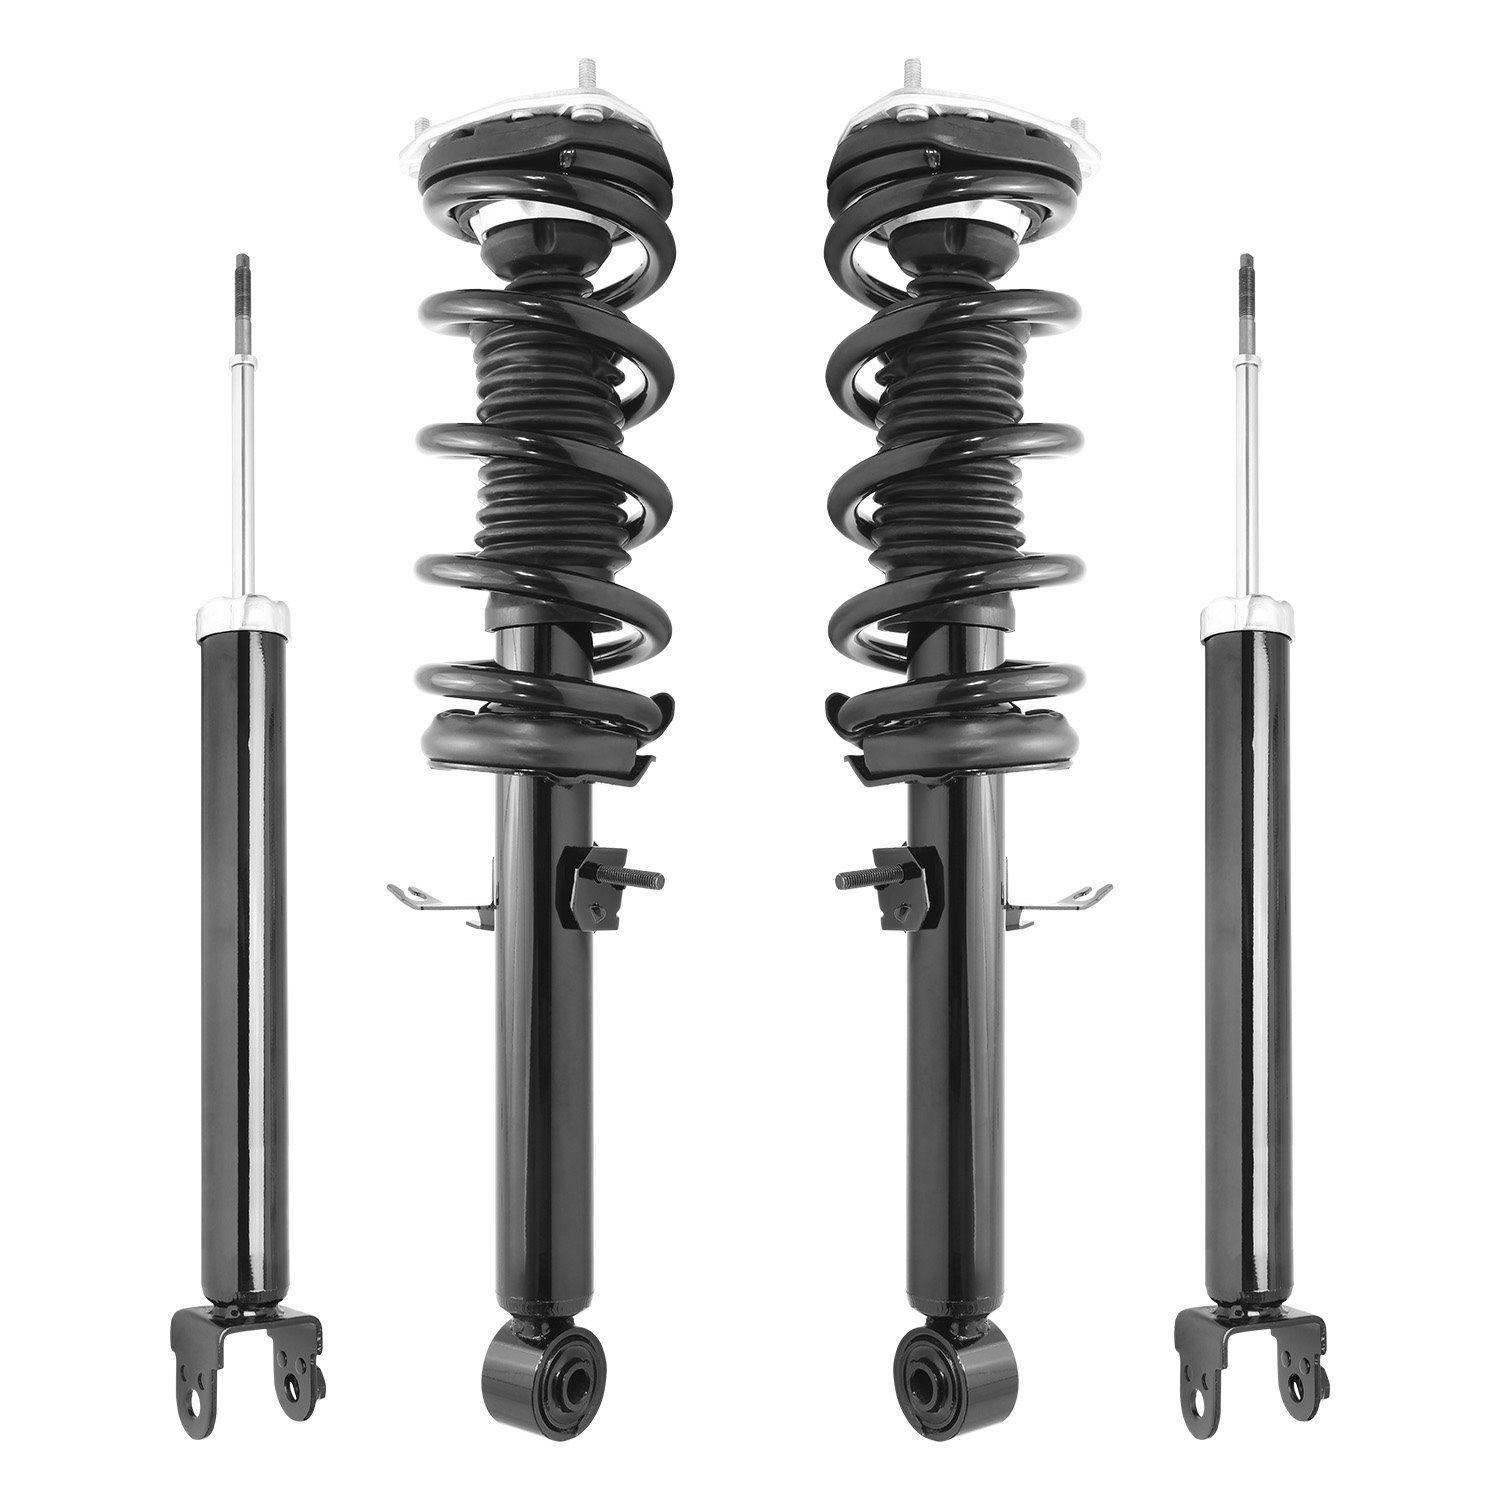 4-11405-255090-001 Front & Rear Suspension Strut & Coil Spring Assembly Fits Select Infiniti G37